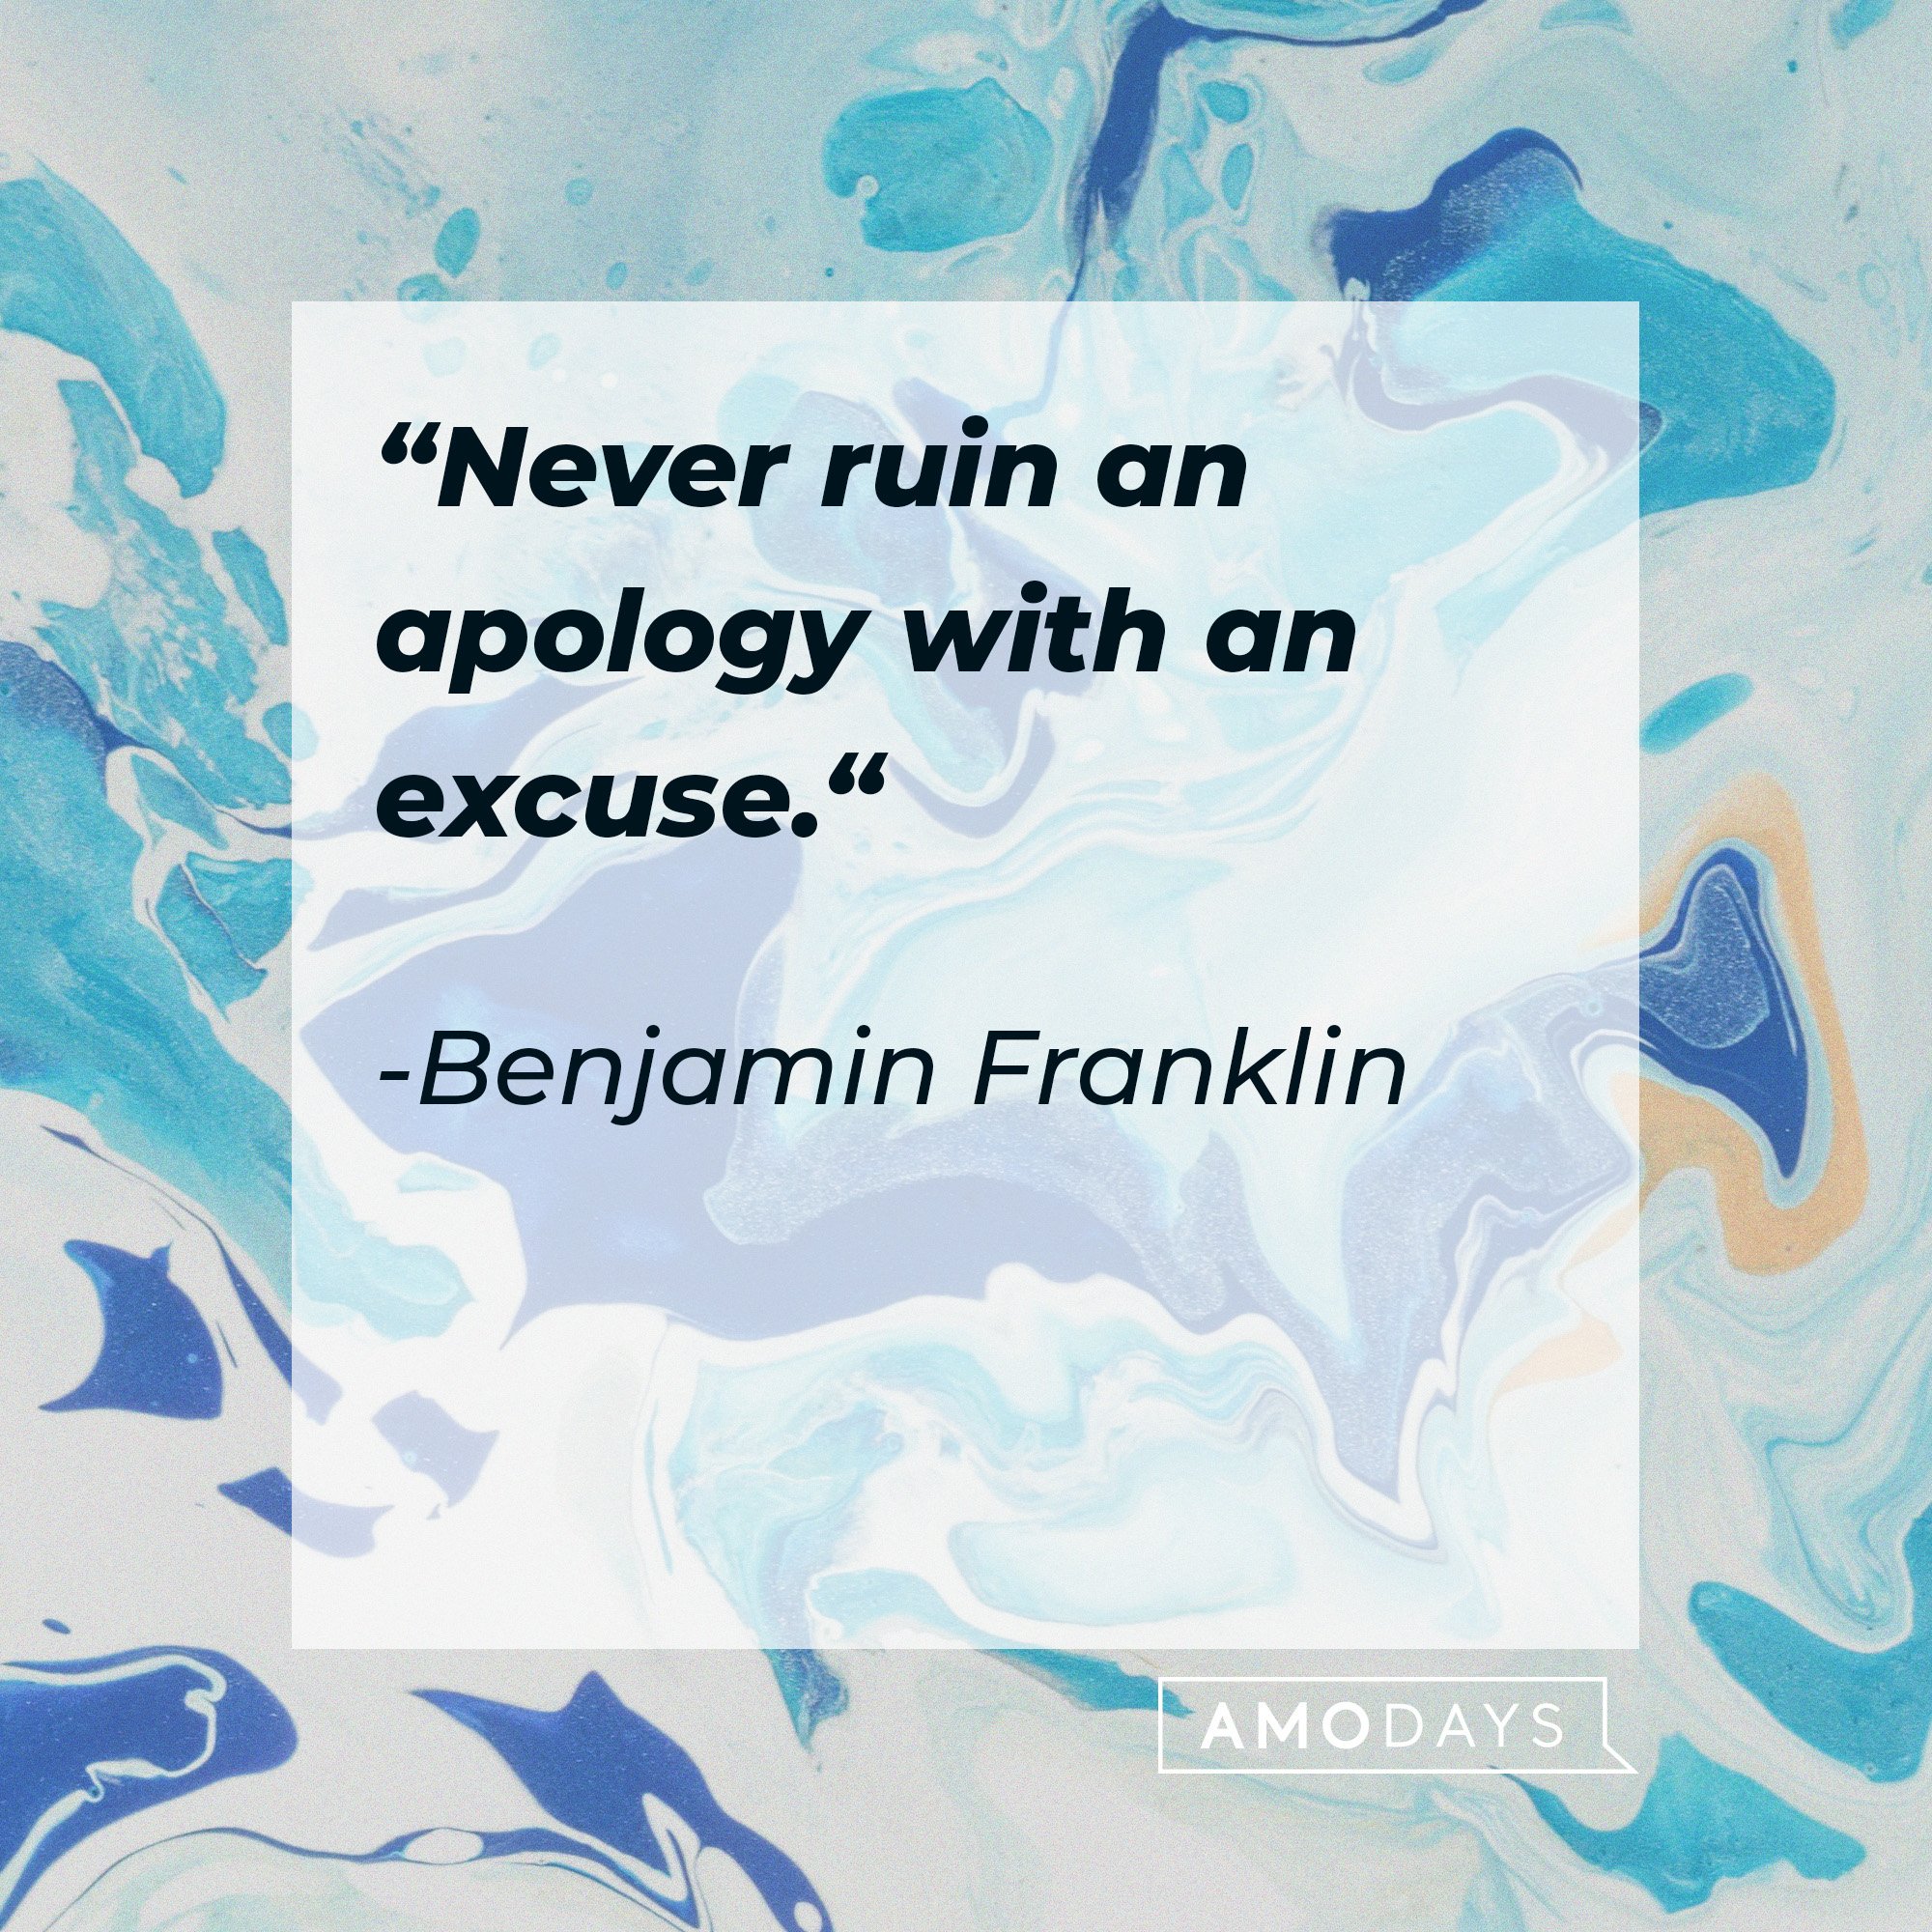  “Never ruin an apology with an excuse.“ | Image: AmoDays